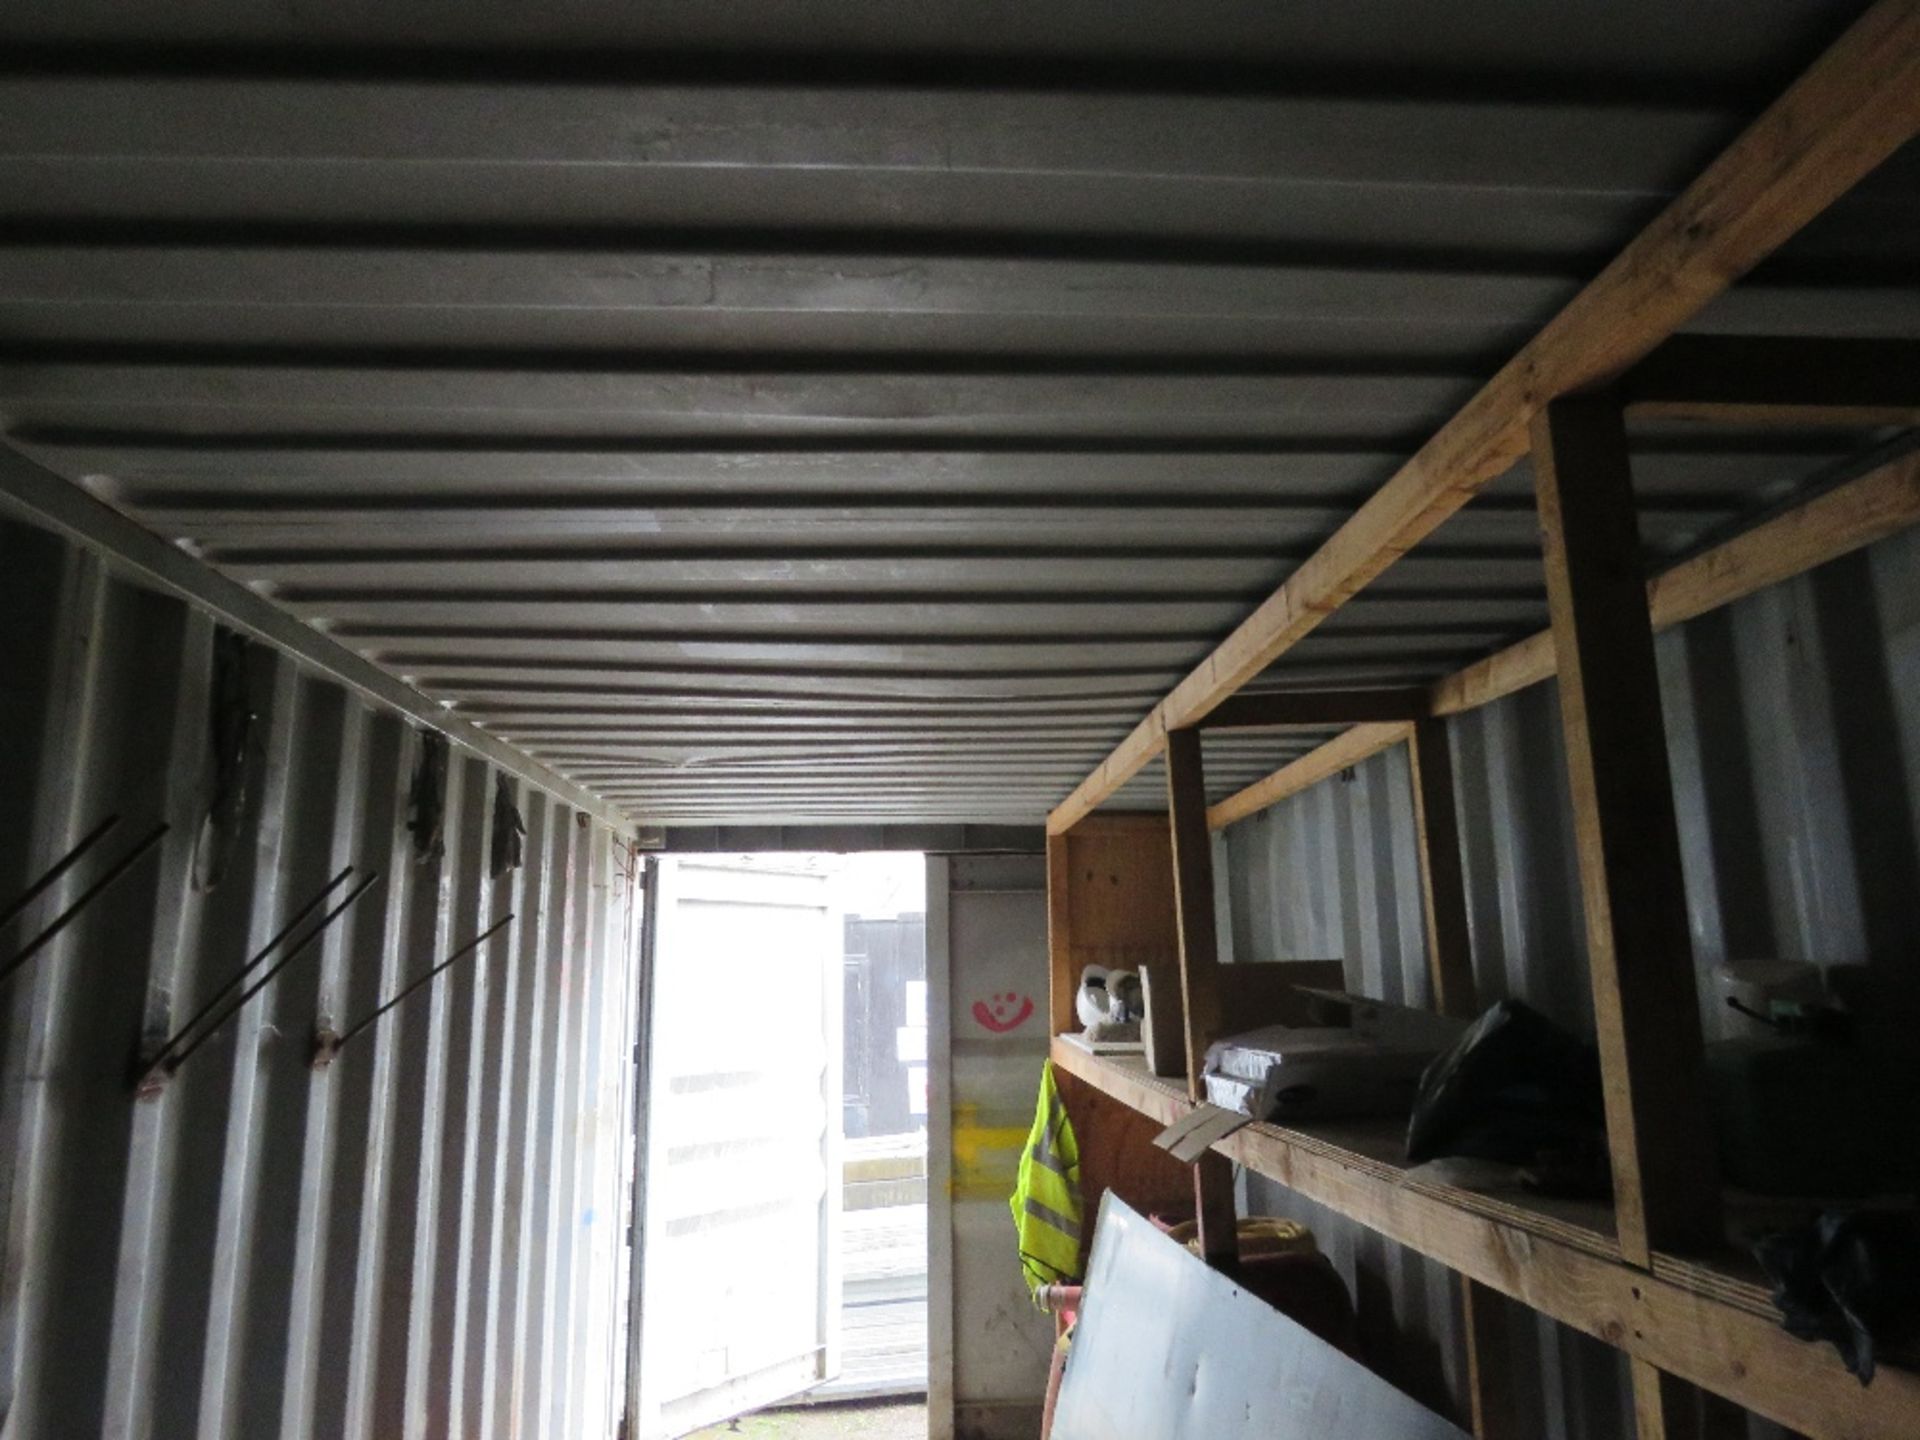 SECURE SHIPPING CONTAINER STORE 20FT LENGTH WITH SOME CONTENTS AND A RACK. . SOURCED FROM COMPANY LI - Image 7 of 7